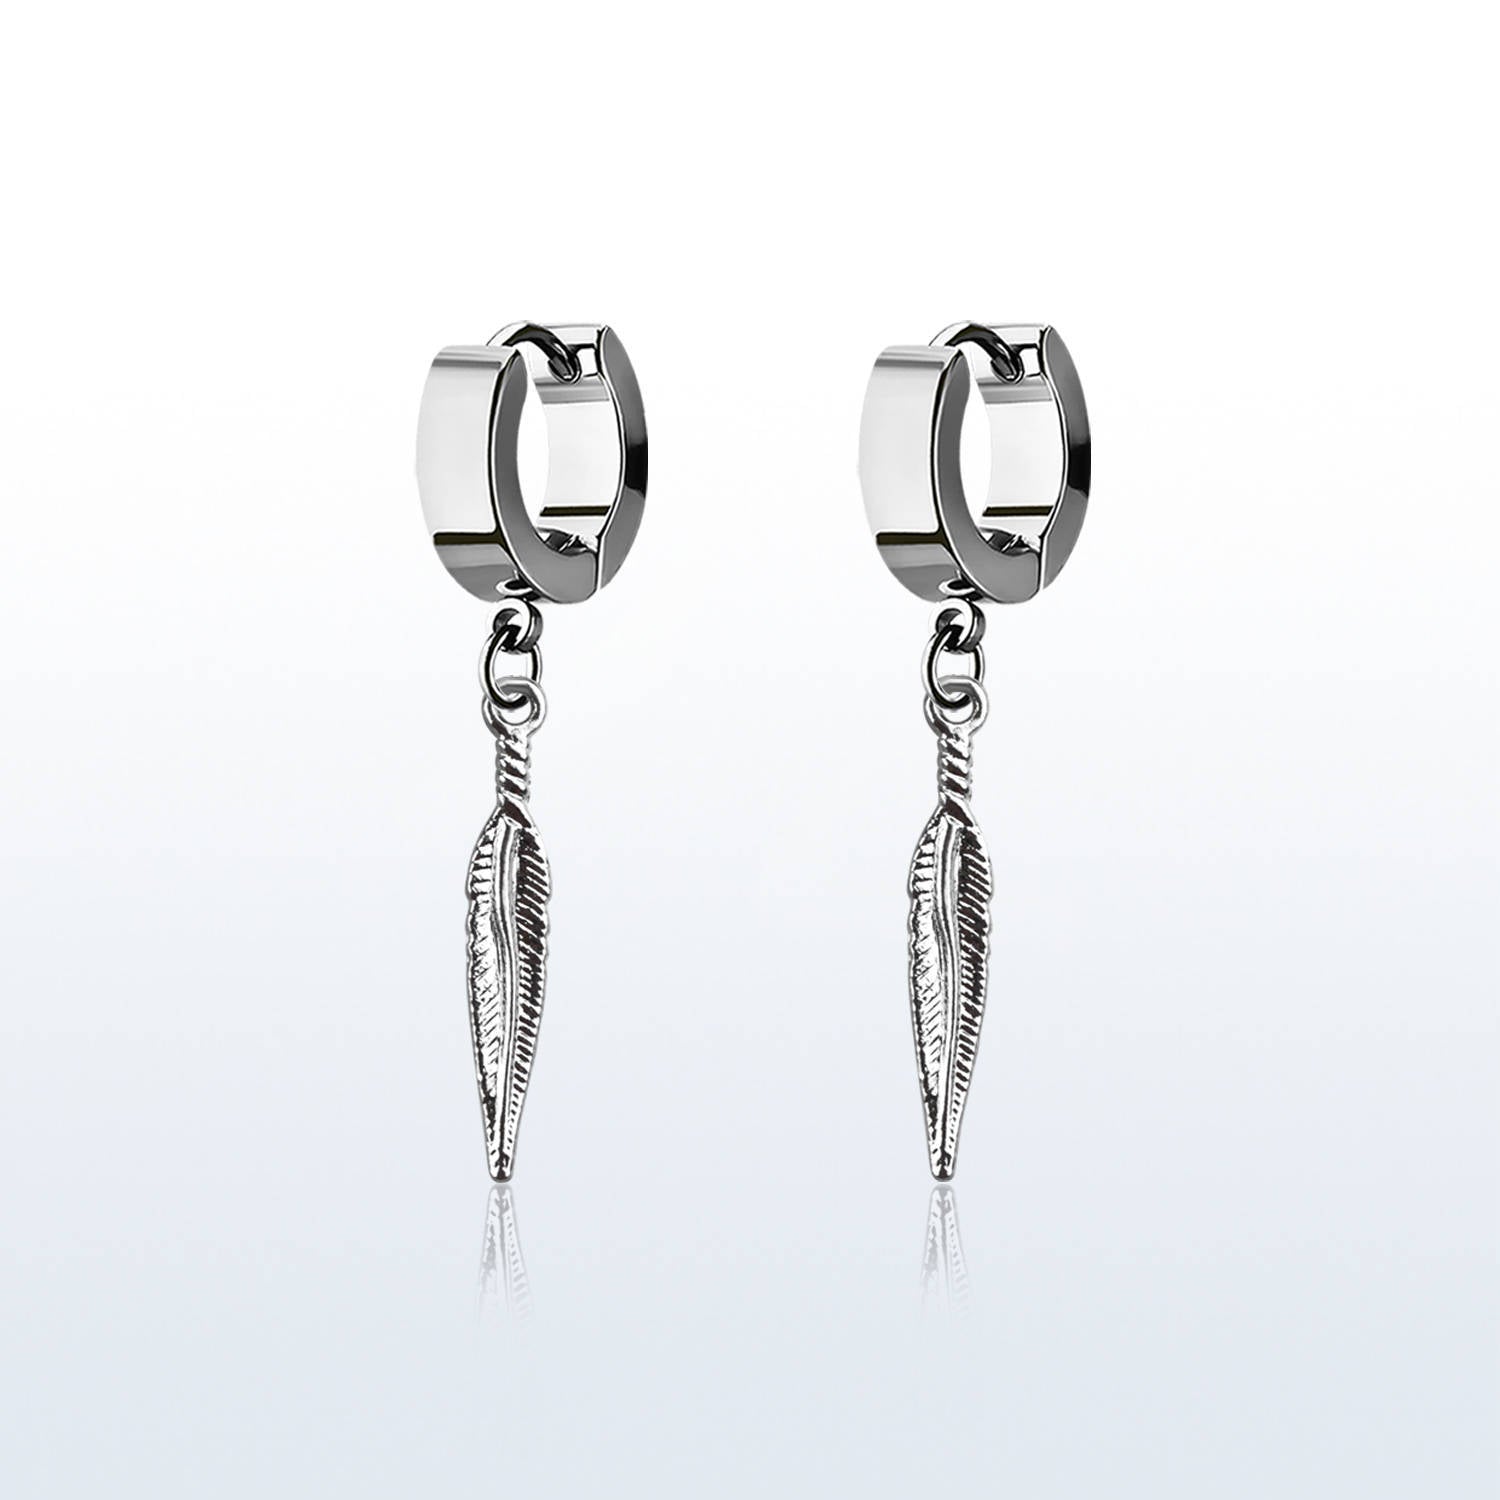 Pair of High Polished Stainless Steel Huggies Earrings with a Dangling Small Feather